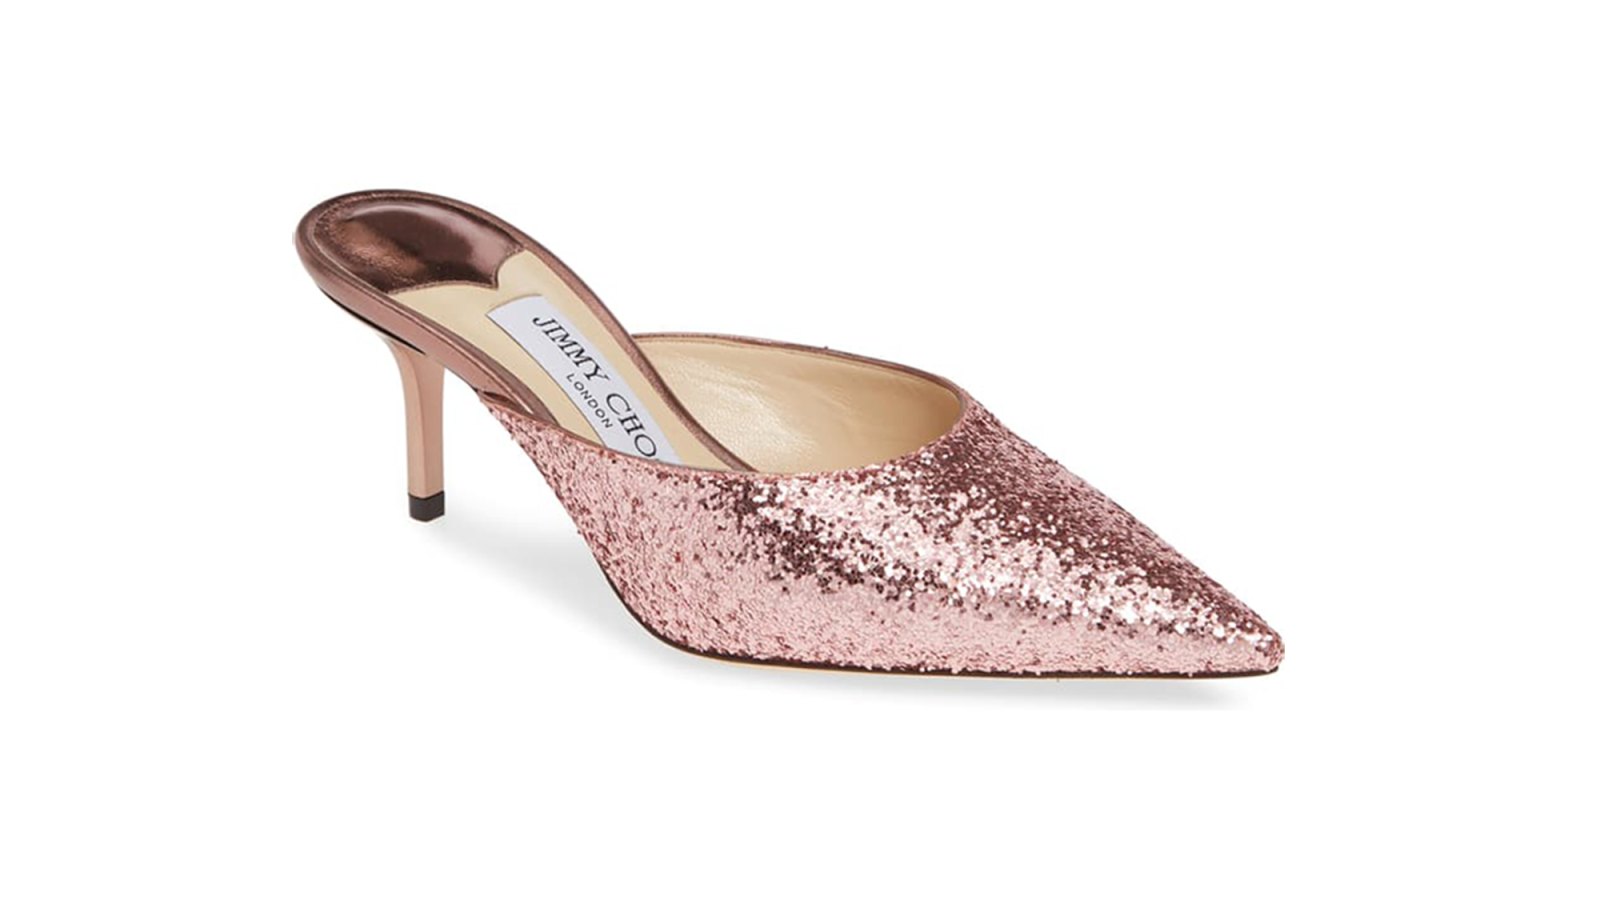 Manolo Blahnik & Jimmy Choo's Are on Sale Right Now — Shop These 5